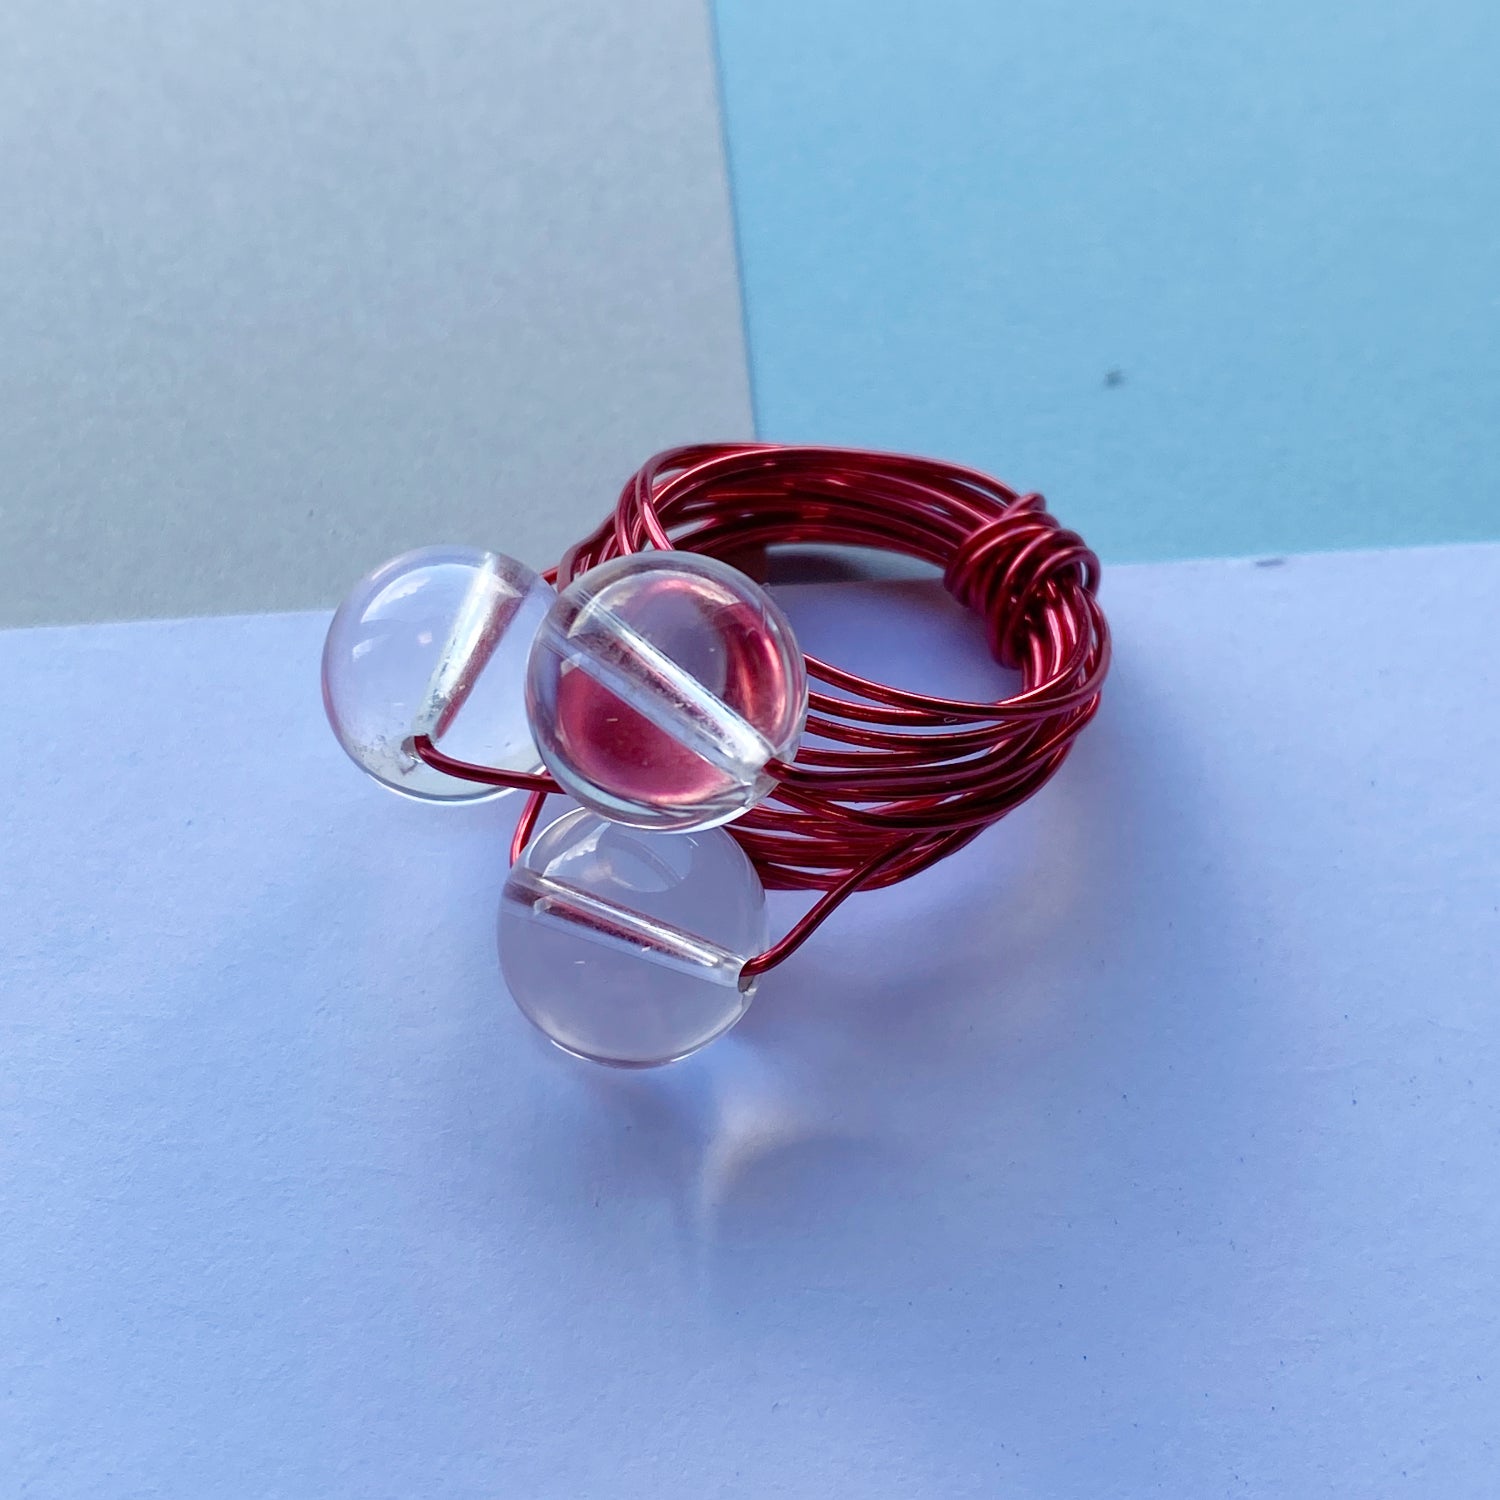 Wire Wrap Rings - Red/purple/pink - Large - The Argentum Design Co